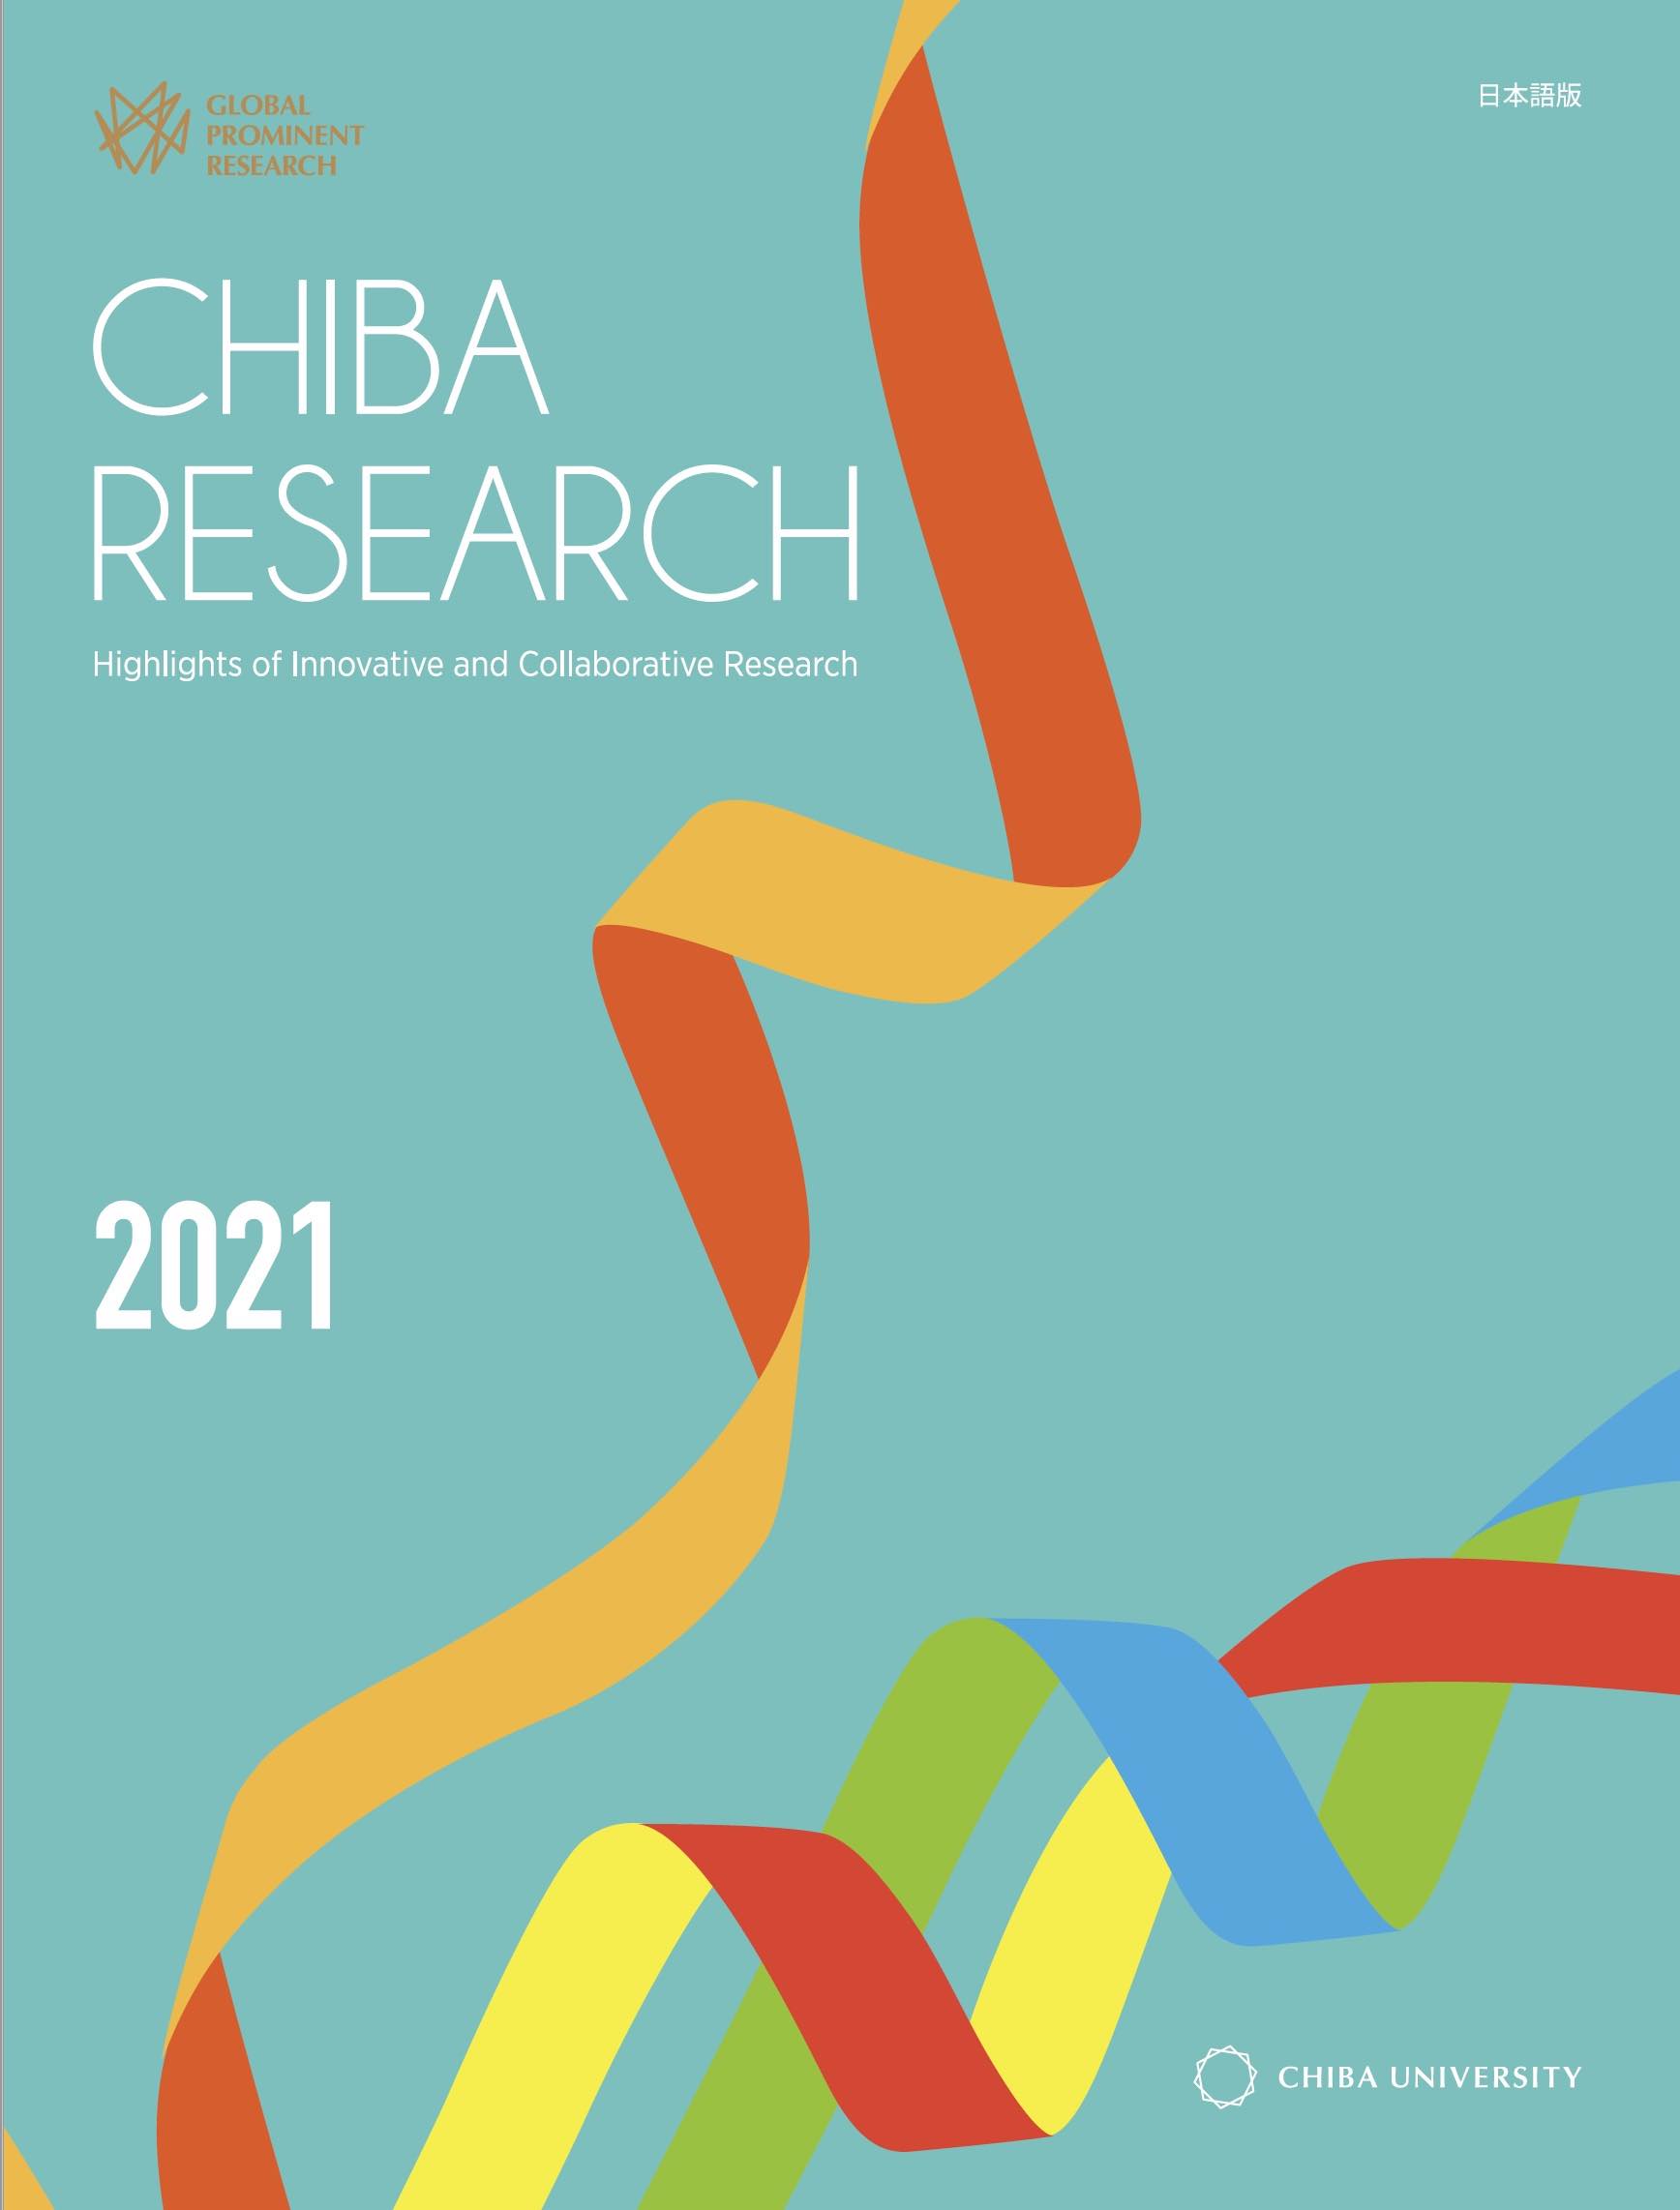 Book Cover for Chiba Research 2020